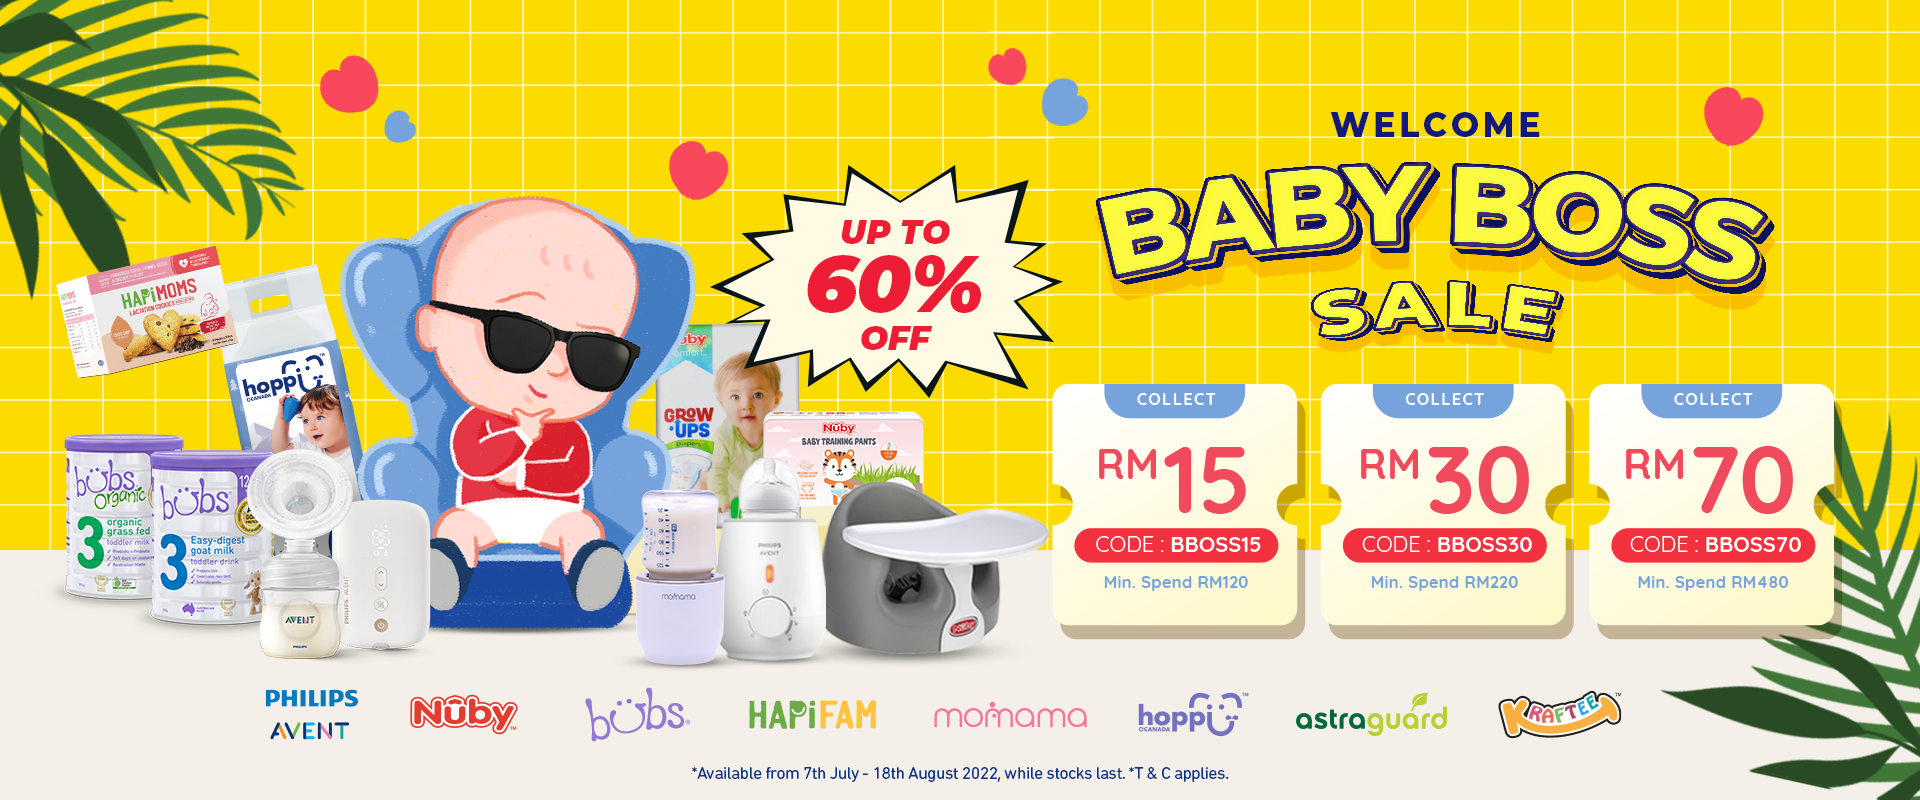 Astra Family Welcome baby boss sale.